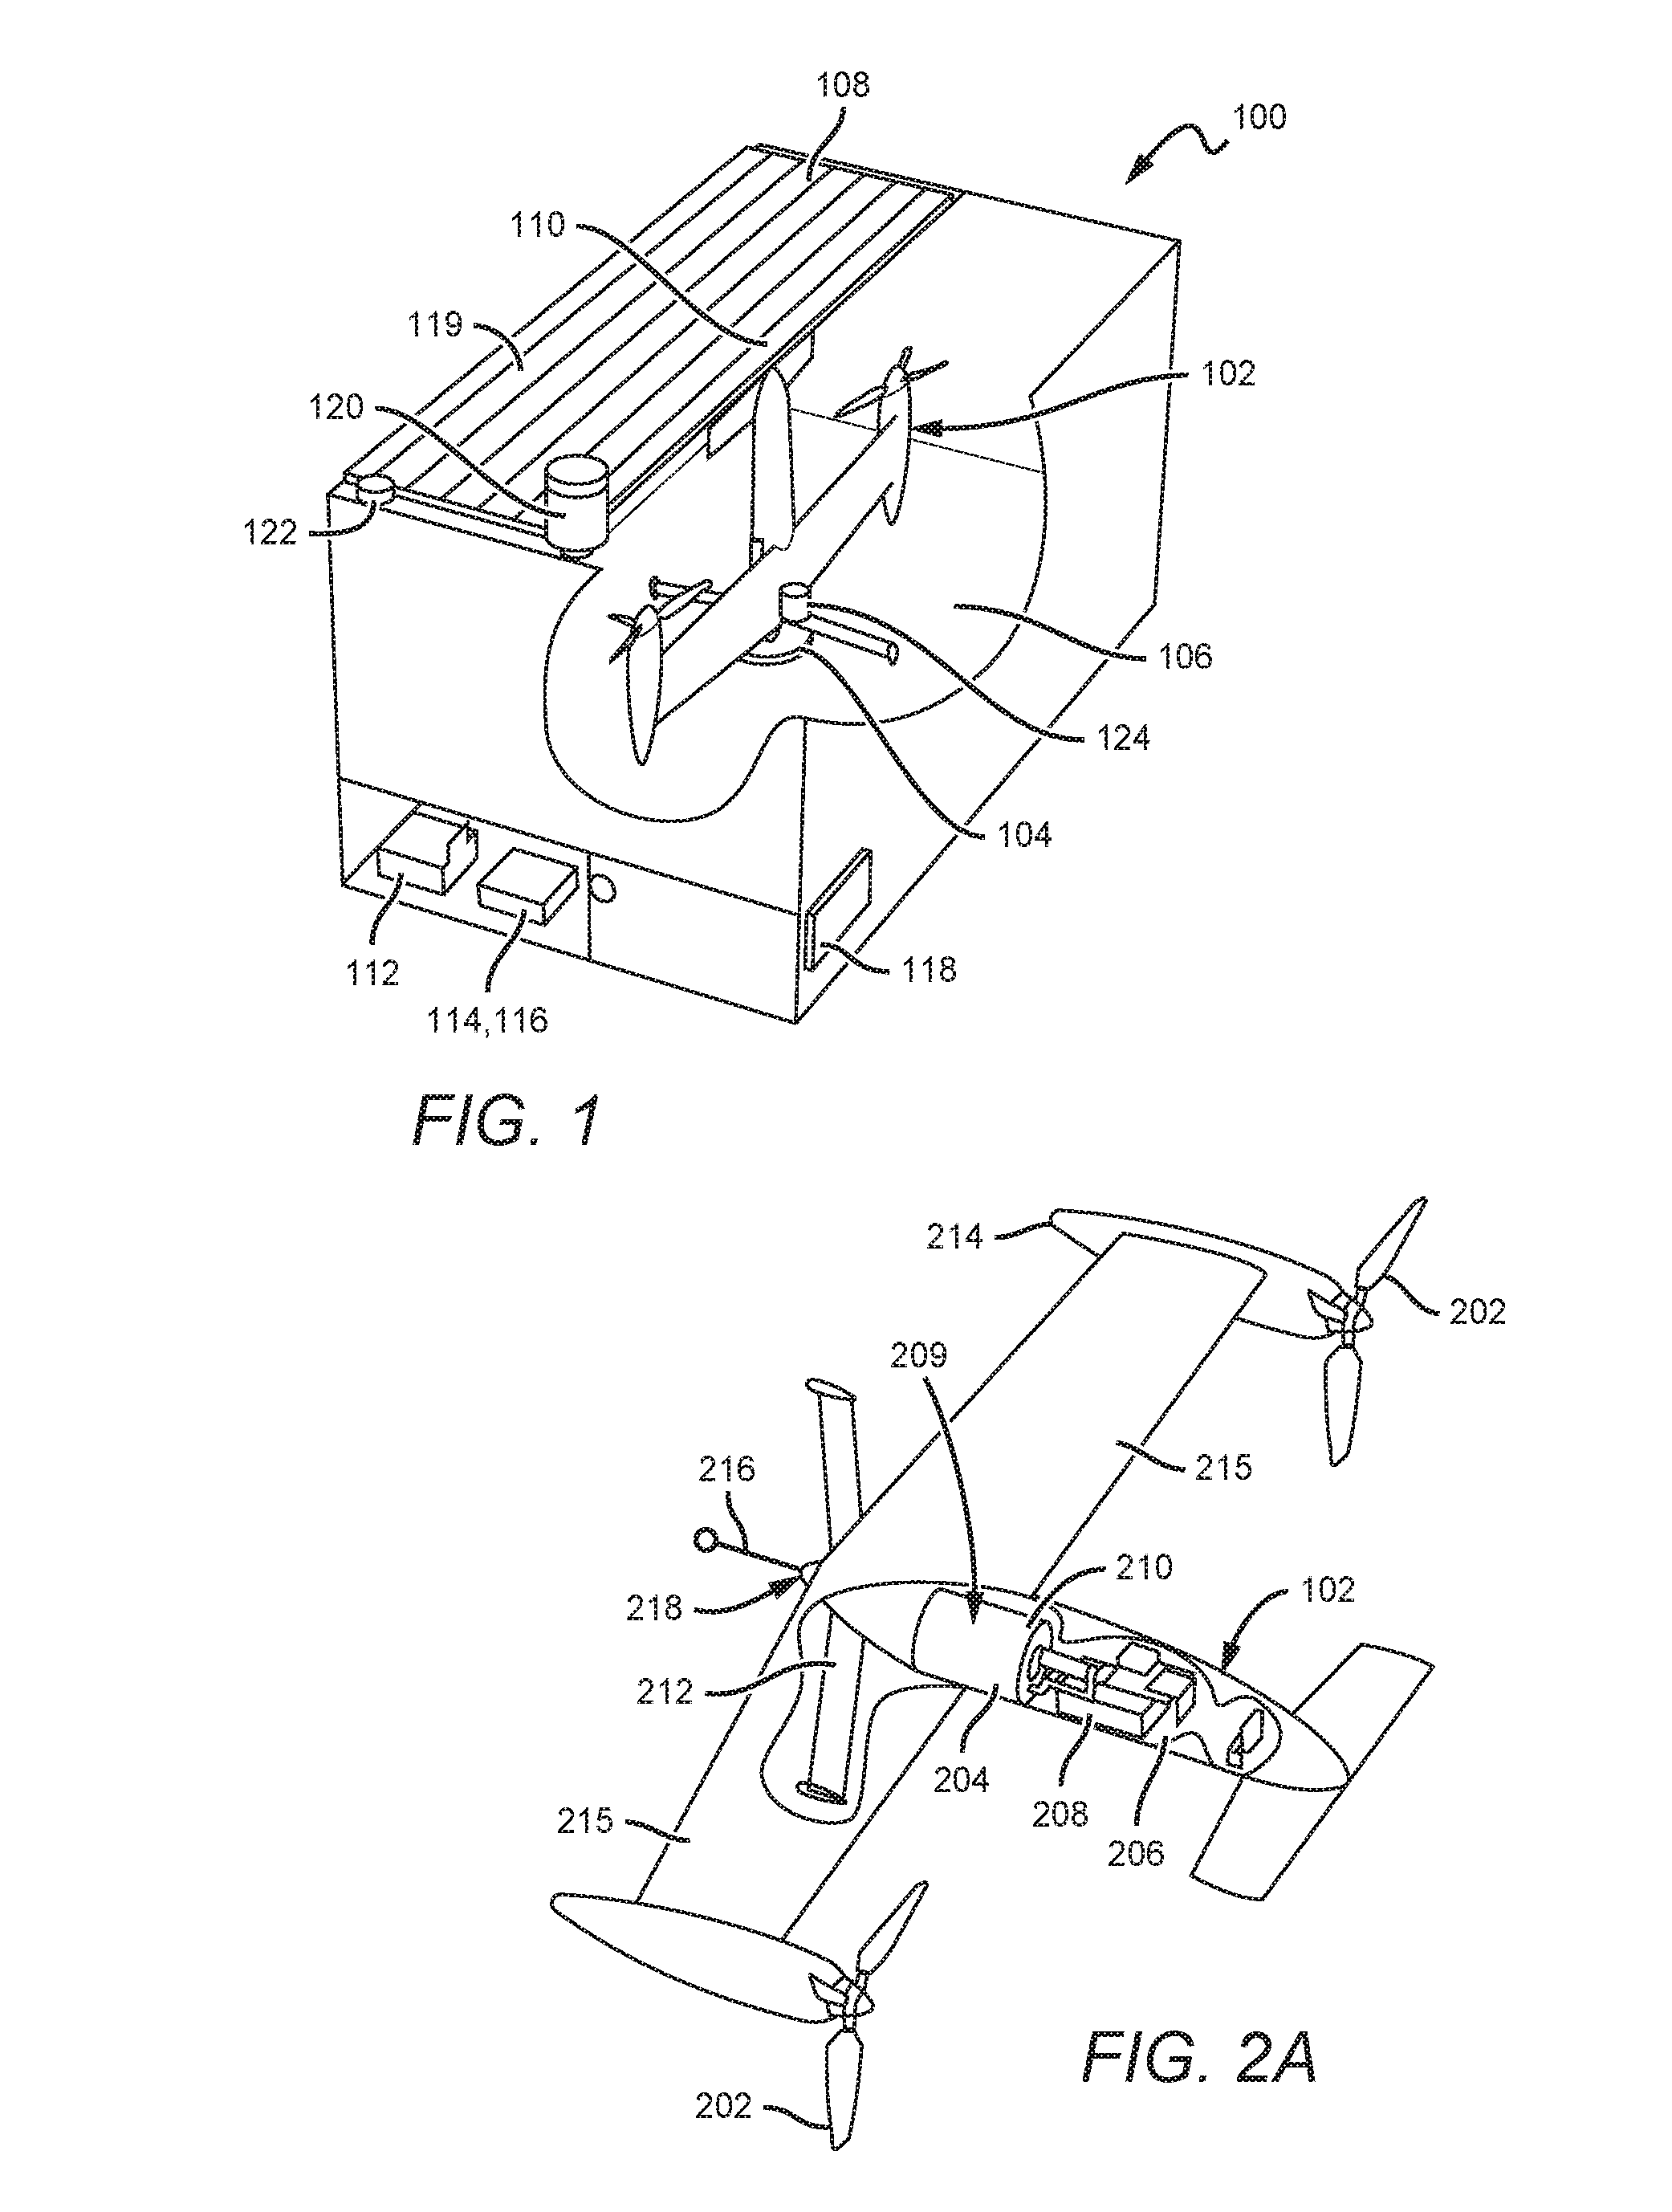 Power and communication interface for vertical take-off and landing (VTOL) unmanned aerial vehicles (UAVS)